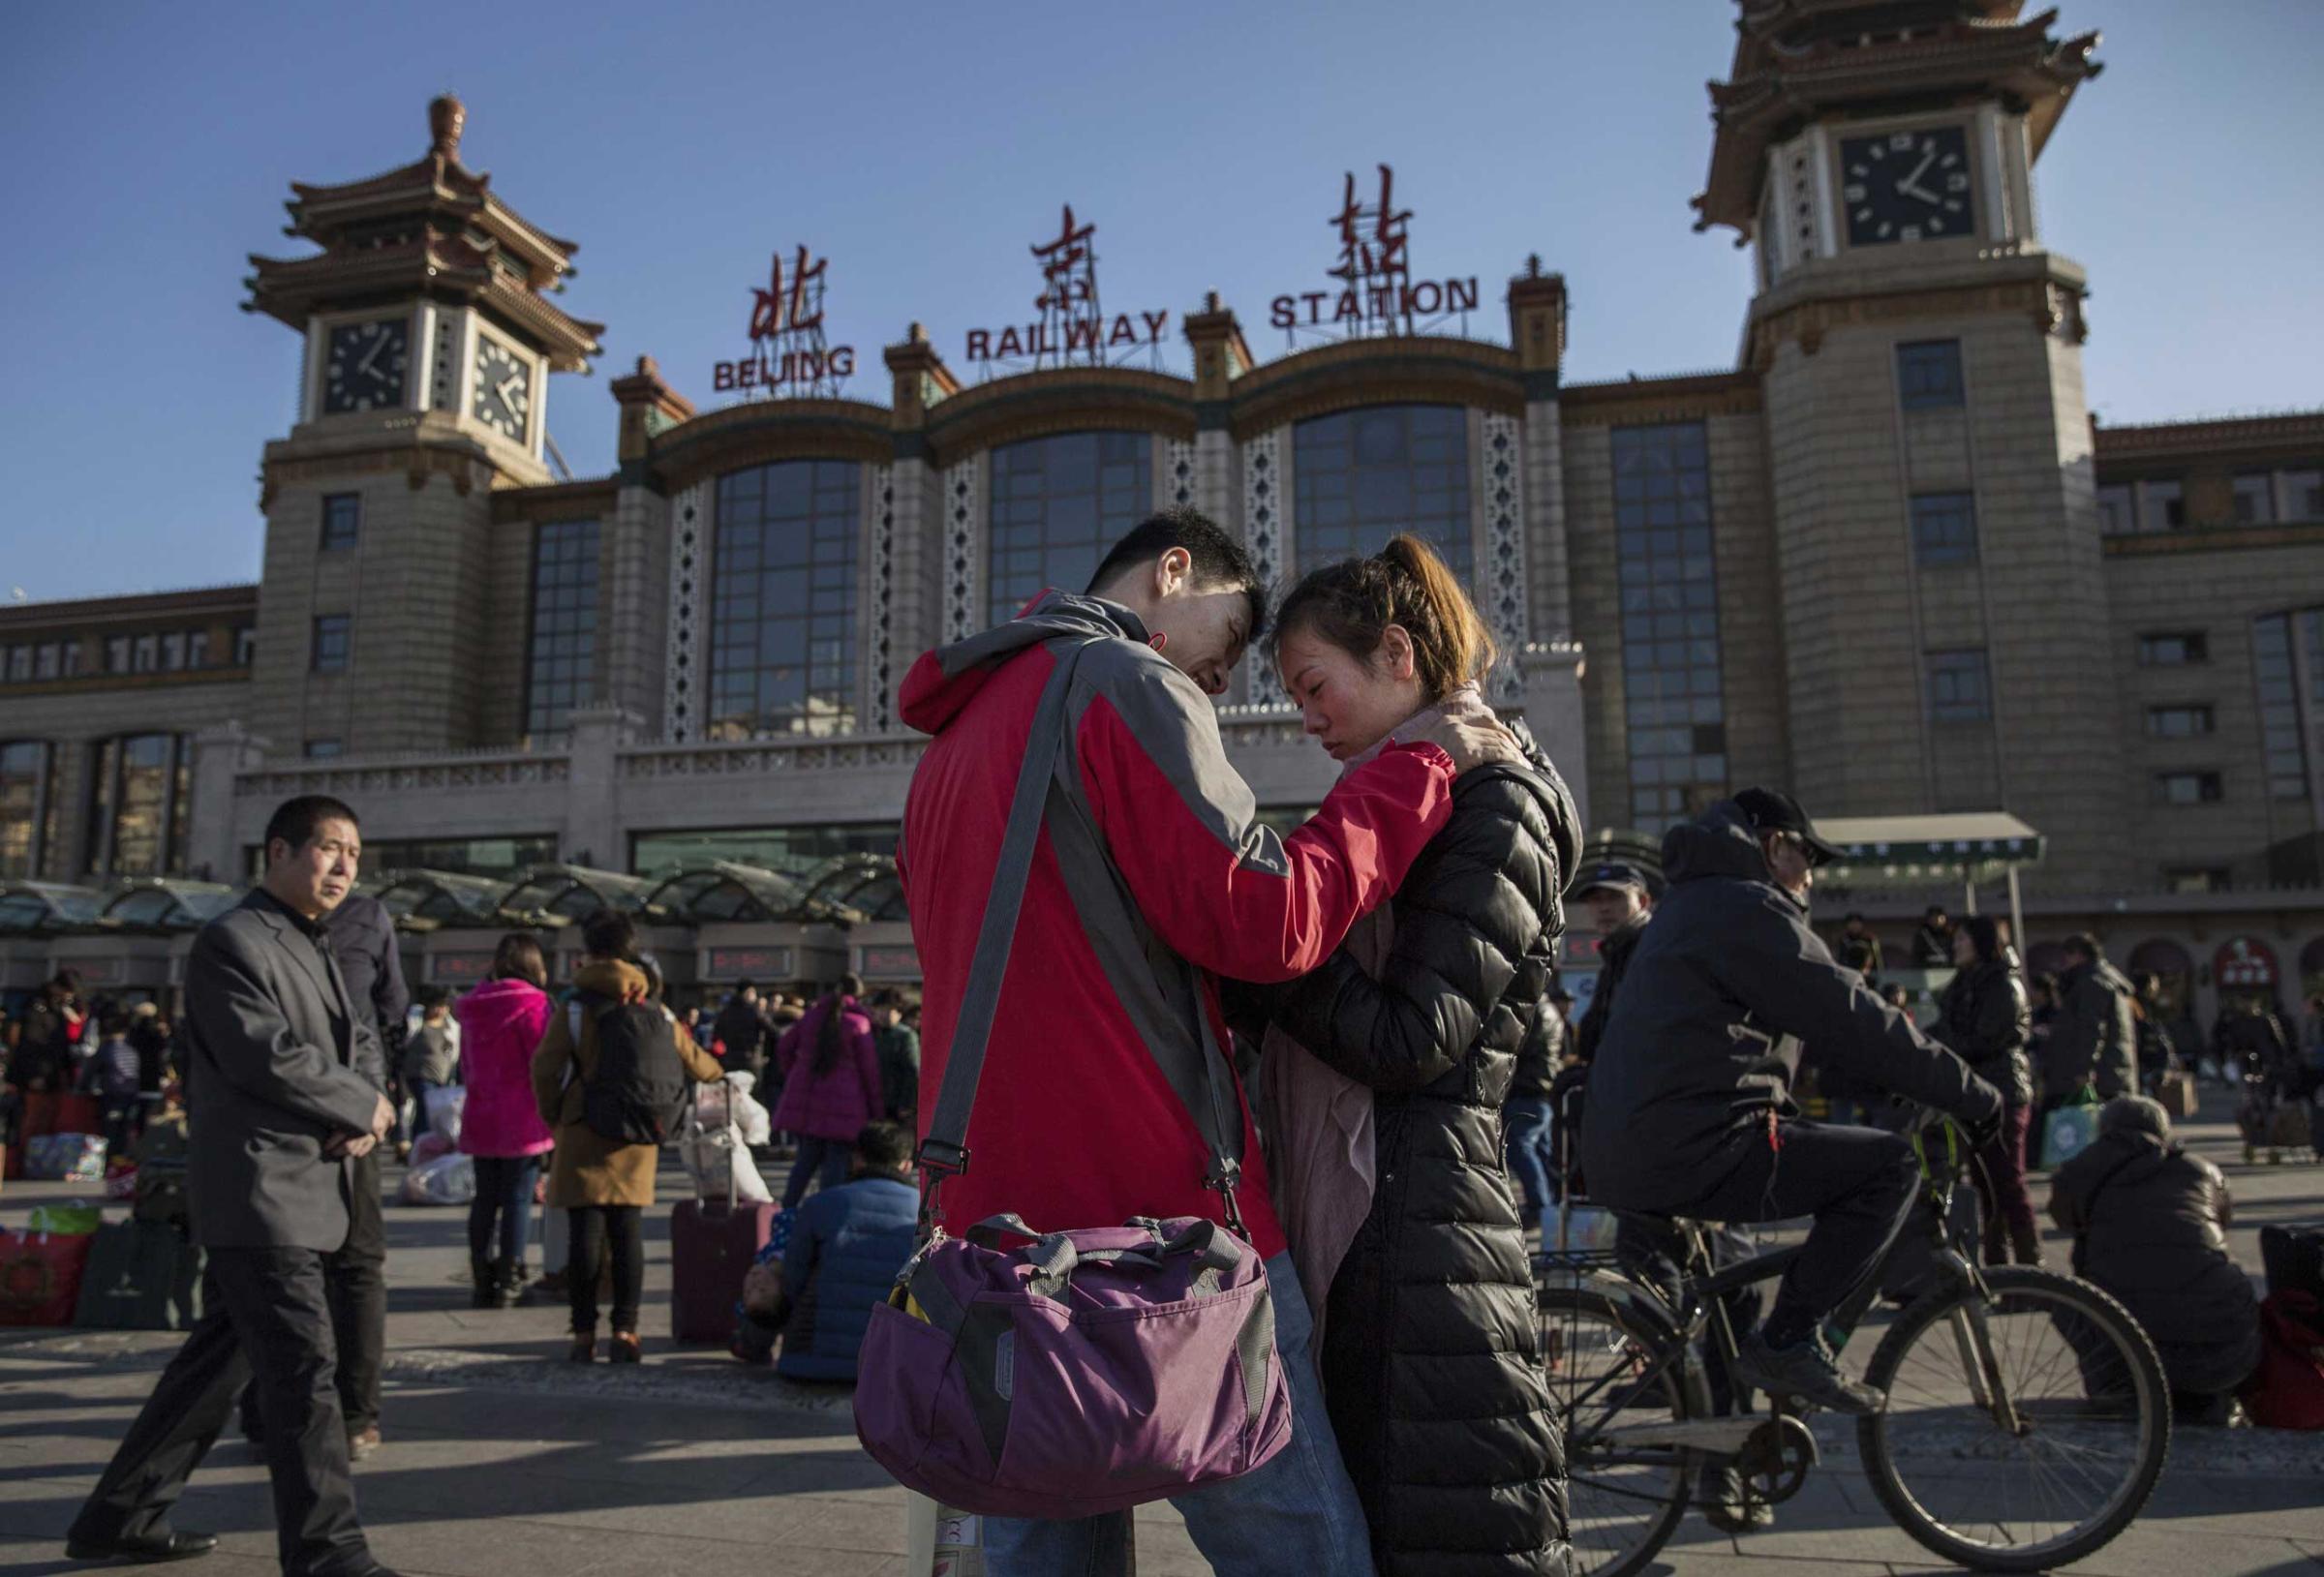 A couple says goodbye before leaving to visit their respective families for the Spring Festival at a local railway station on Feb. 17, 2015 in Beijing.